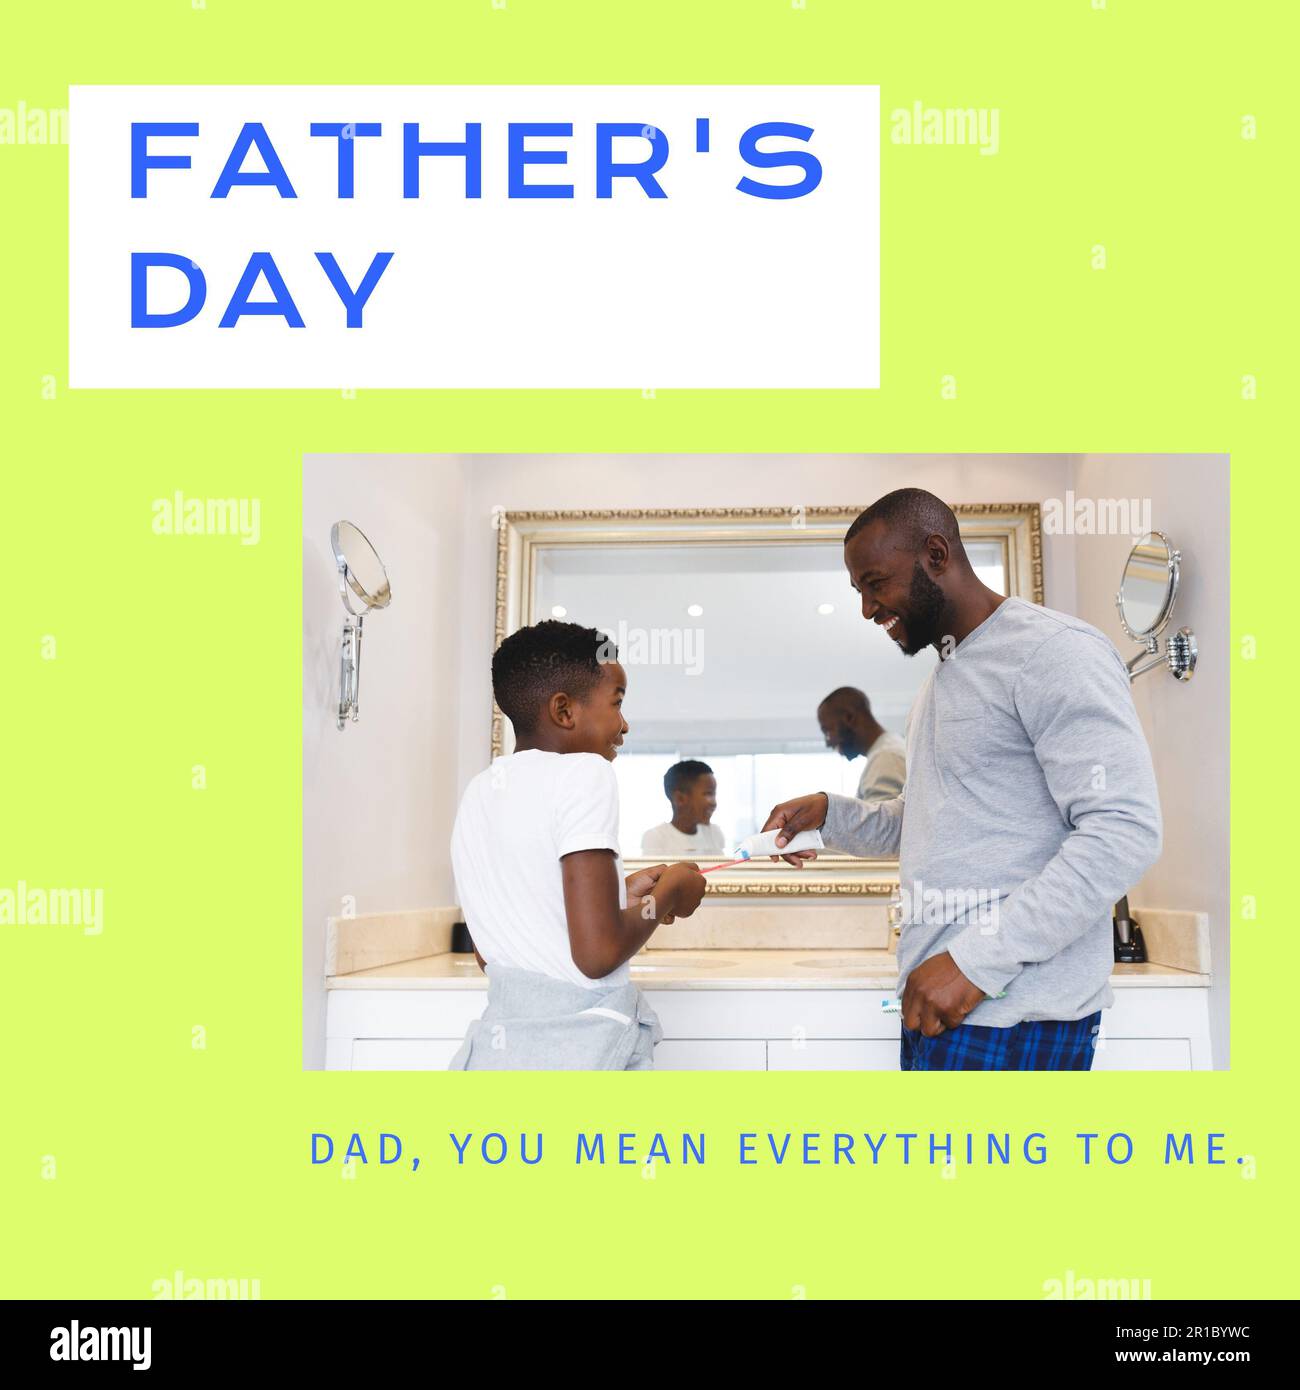 Composition of father's day text over african american father and son with toothbrush Stock Photo